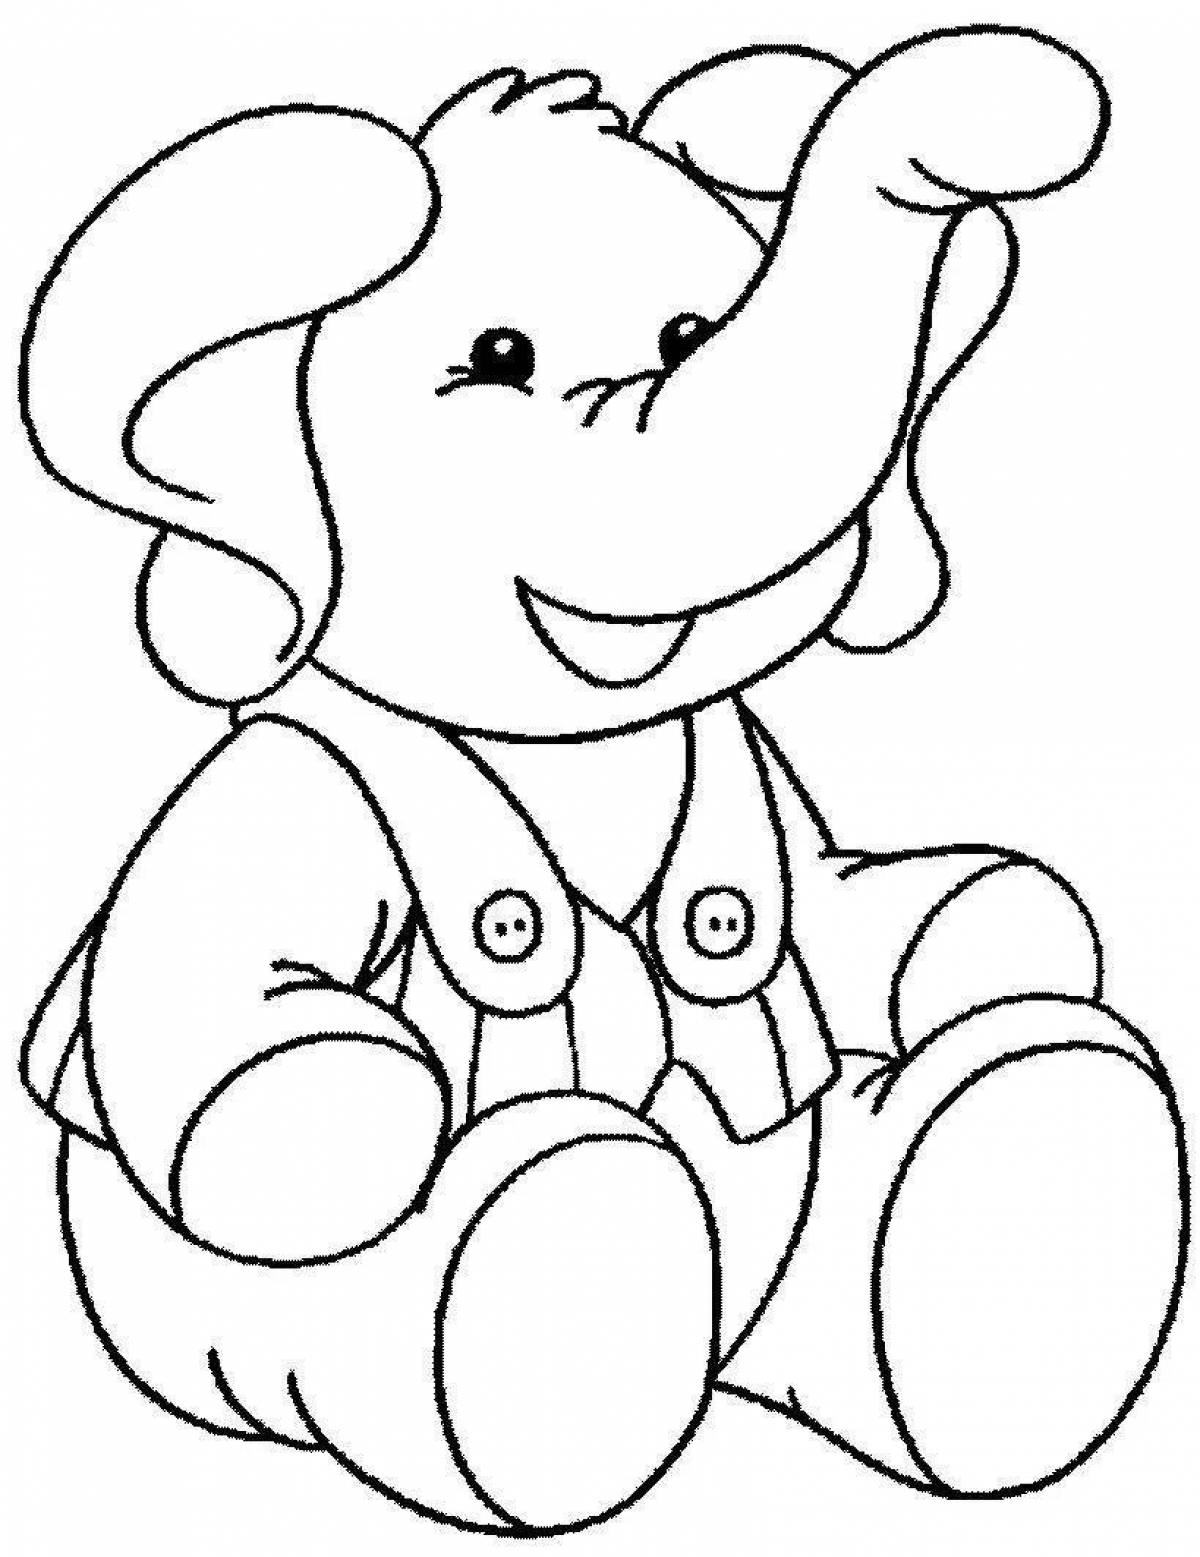 Color-frenzy coloring page for kids 5-6 years old